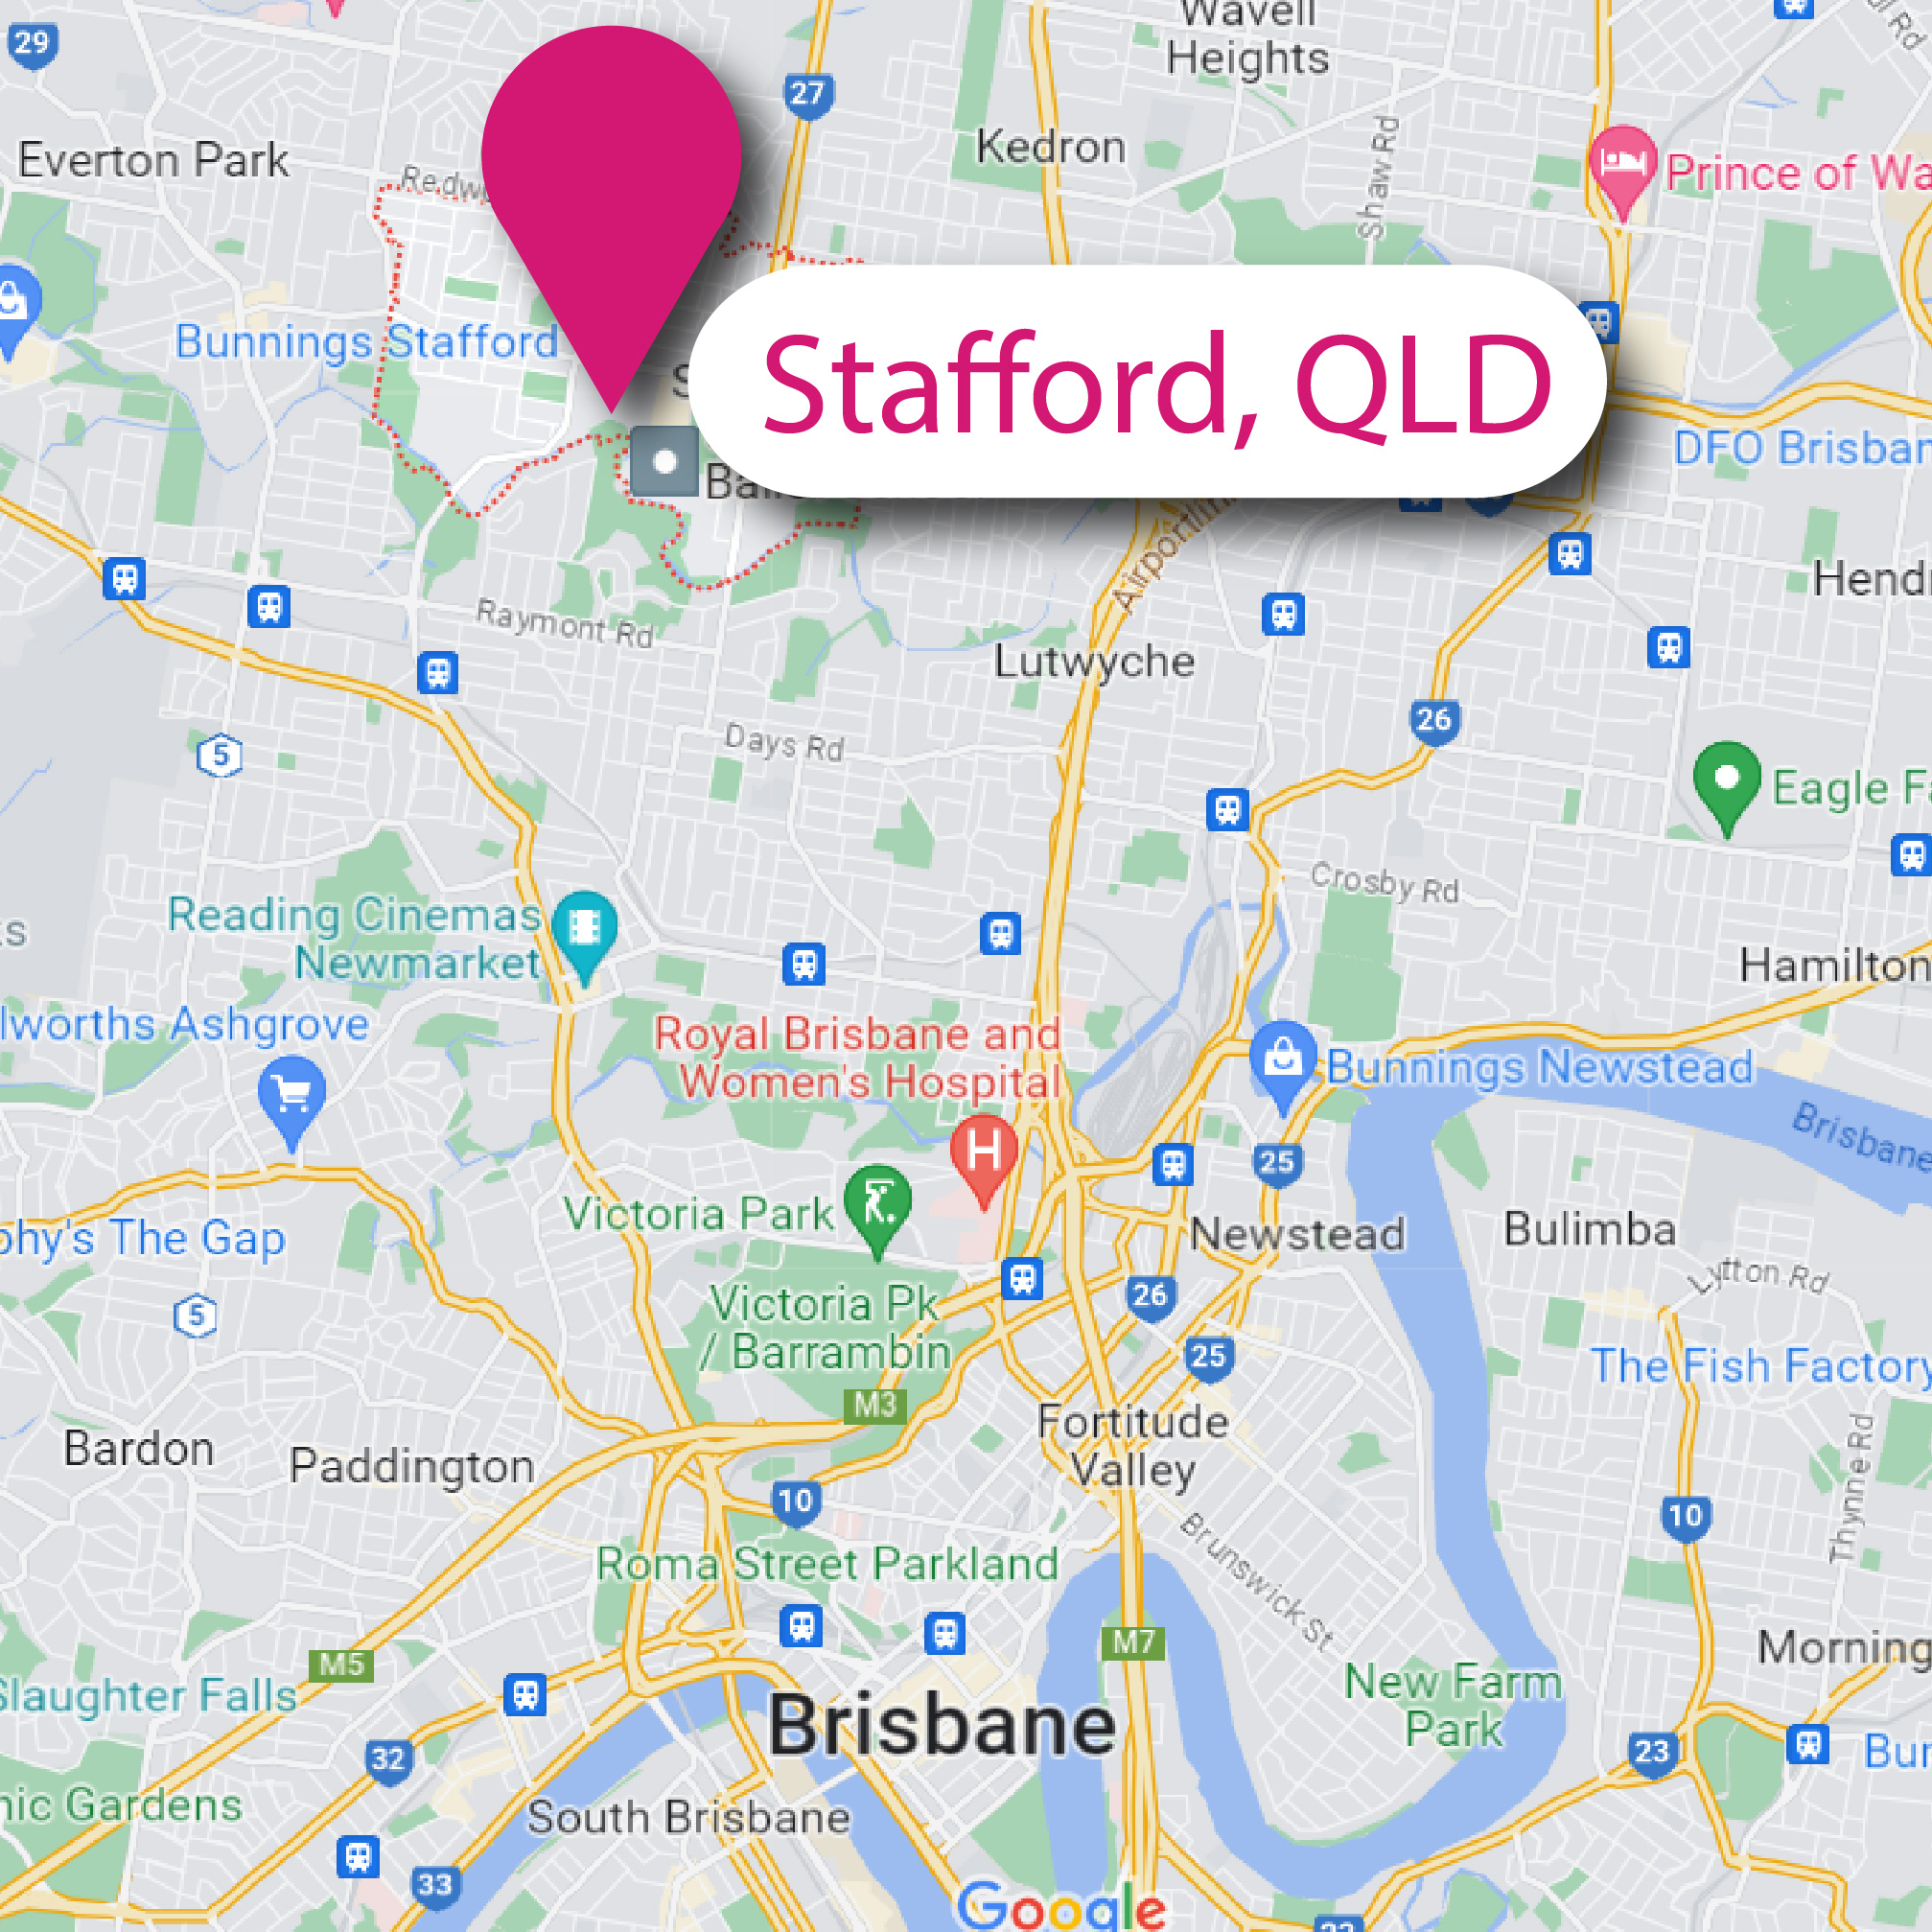 Consider opening a Kumon franchise in Stafford, QLD